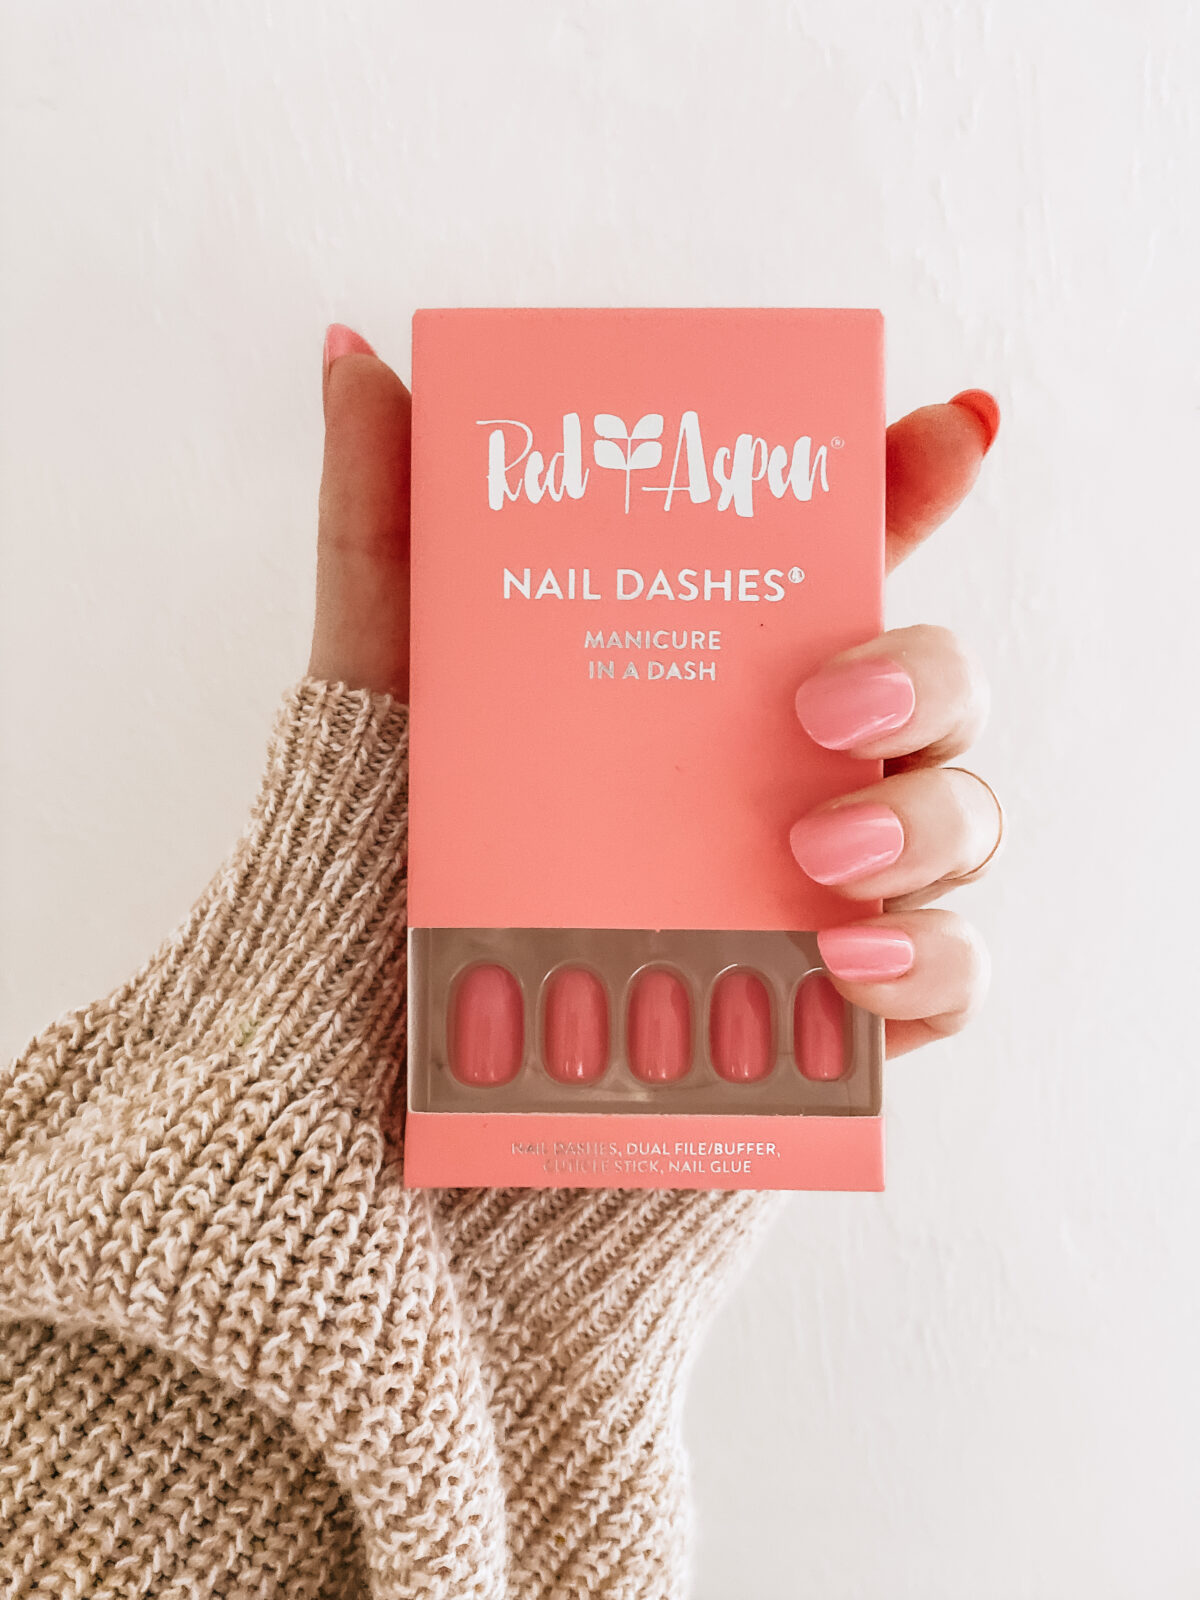 hand with red aspen manicure holding box of nail dashes
